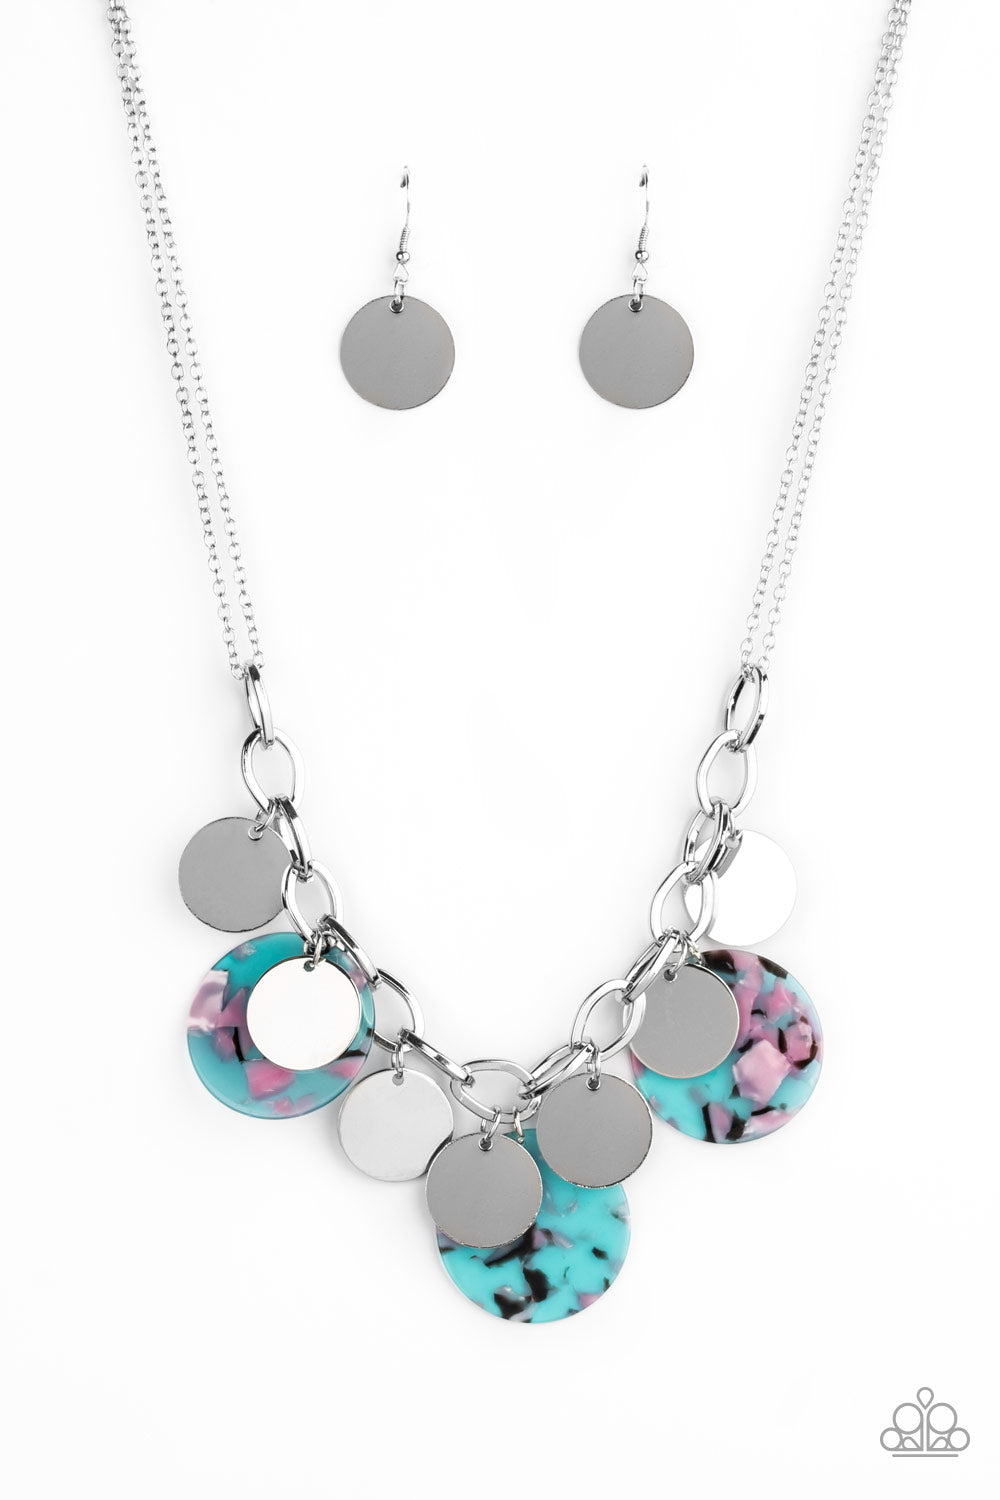 ﻿Confetti Confection Blue Necklace - Paparazzi Accessories  Attached to doubled silver chain, a playful collection of colorful acrylic discs and shiny silver discs swing from the bottom of a bold silver chain, creating a bubbly fringe below the collar. Features an adjustable clasp closure. Color may vary.   All Paparazzi Accessories are lead free and nickel free!  Sold as one individual necklace. Includes one pair of matching earrings.